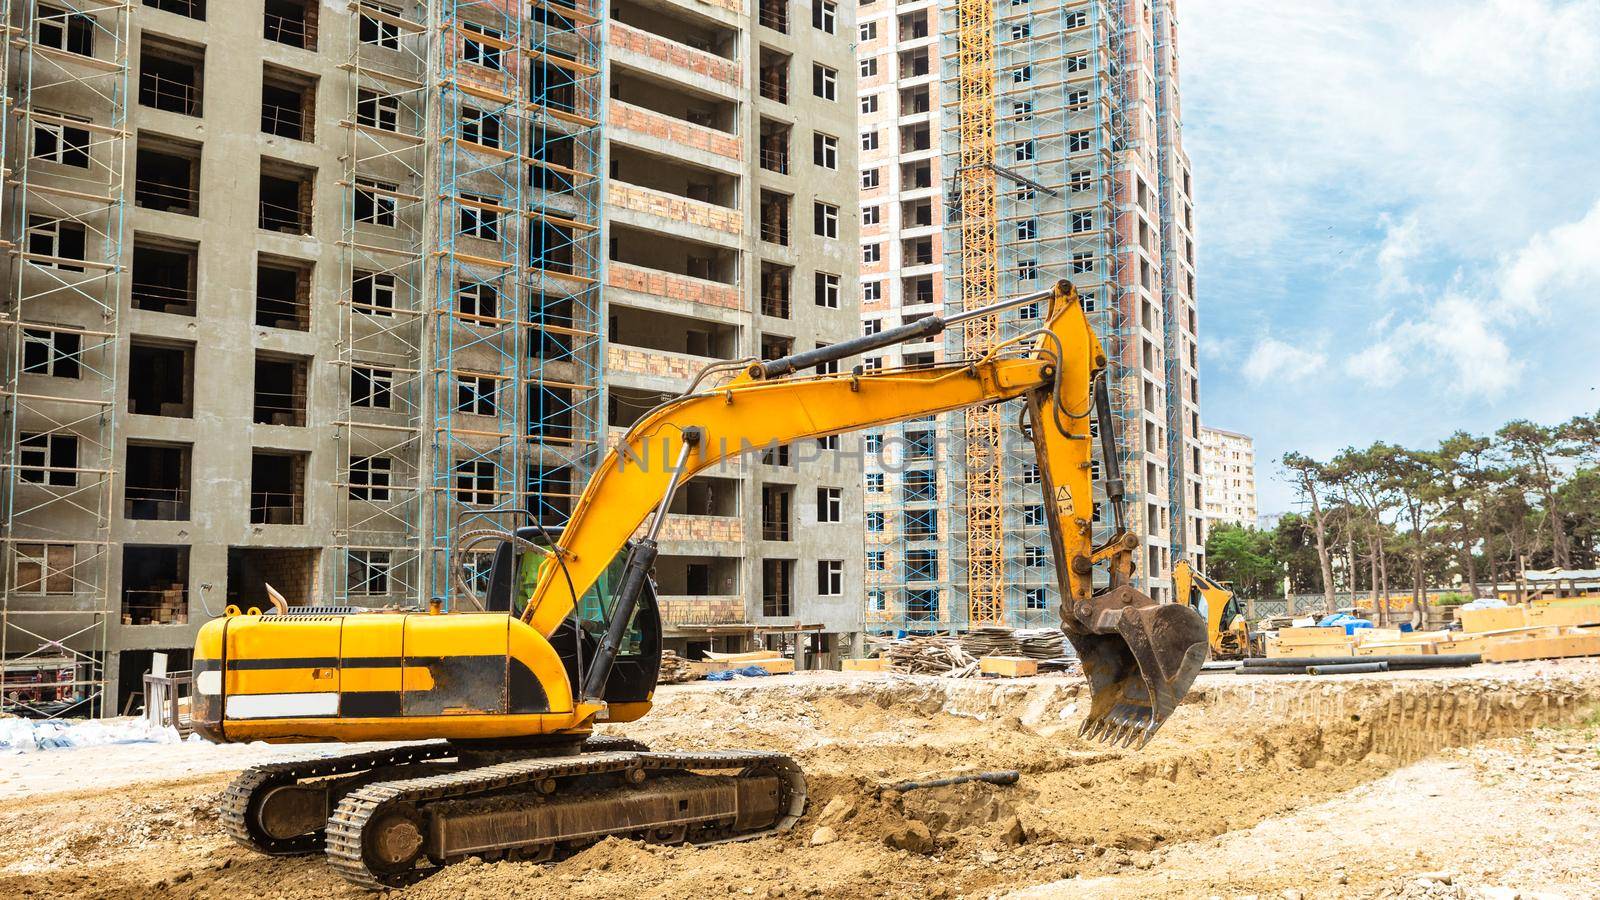 Excavator on the construction site by ferhad